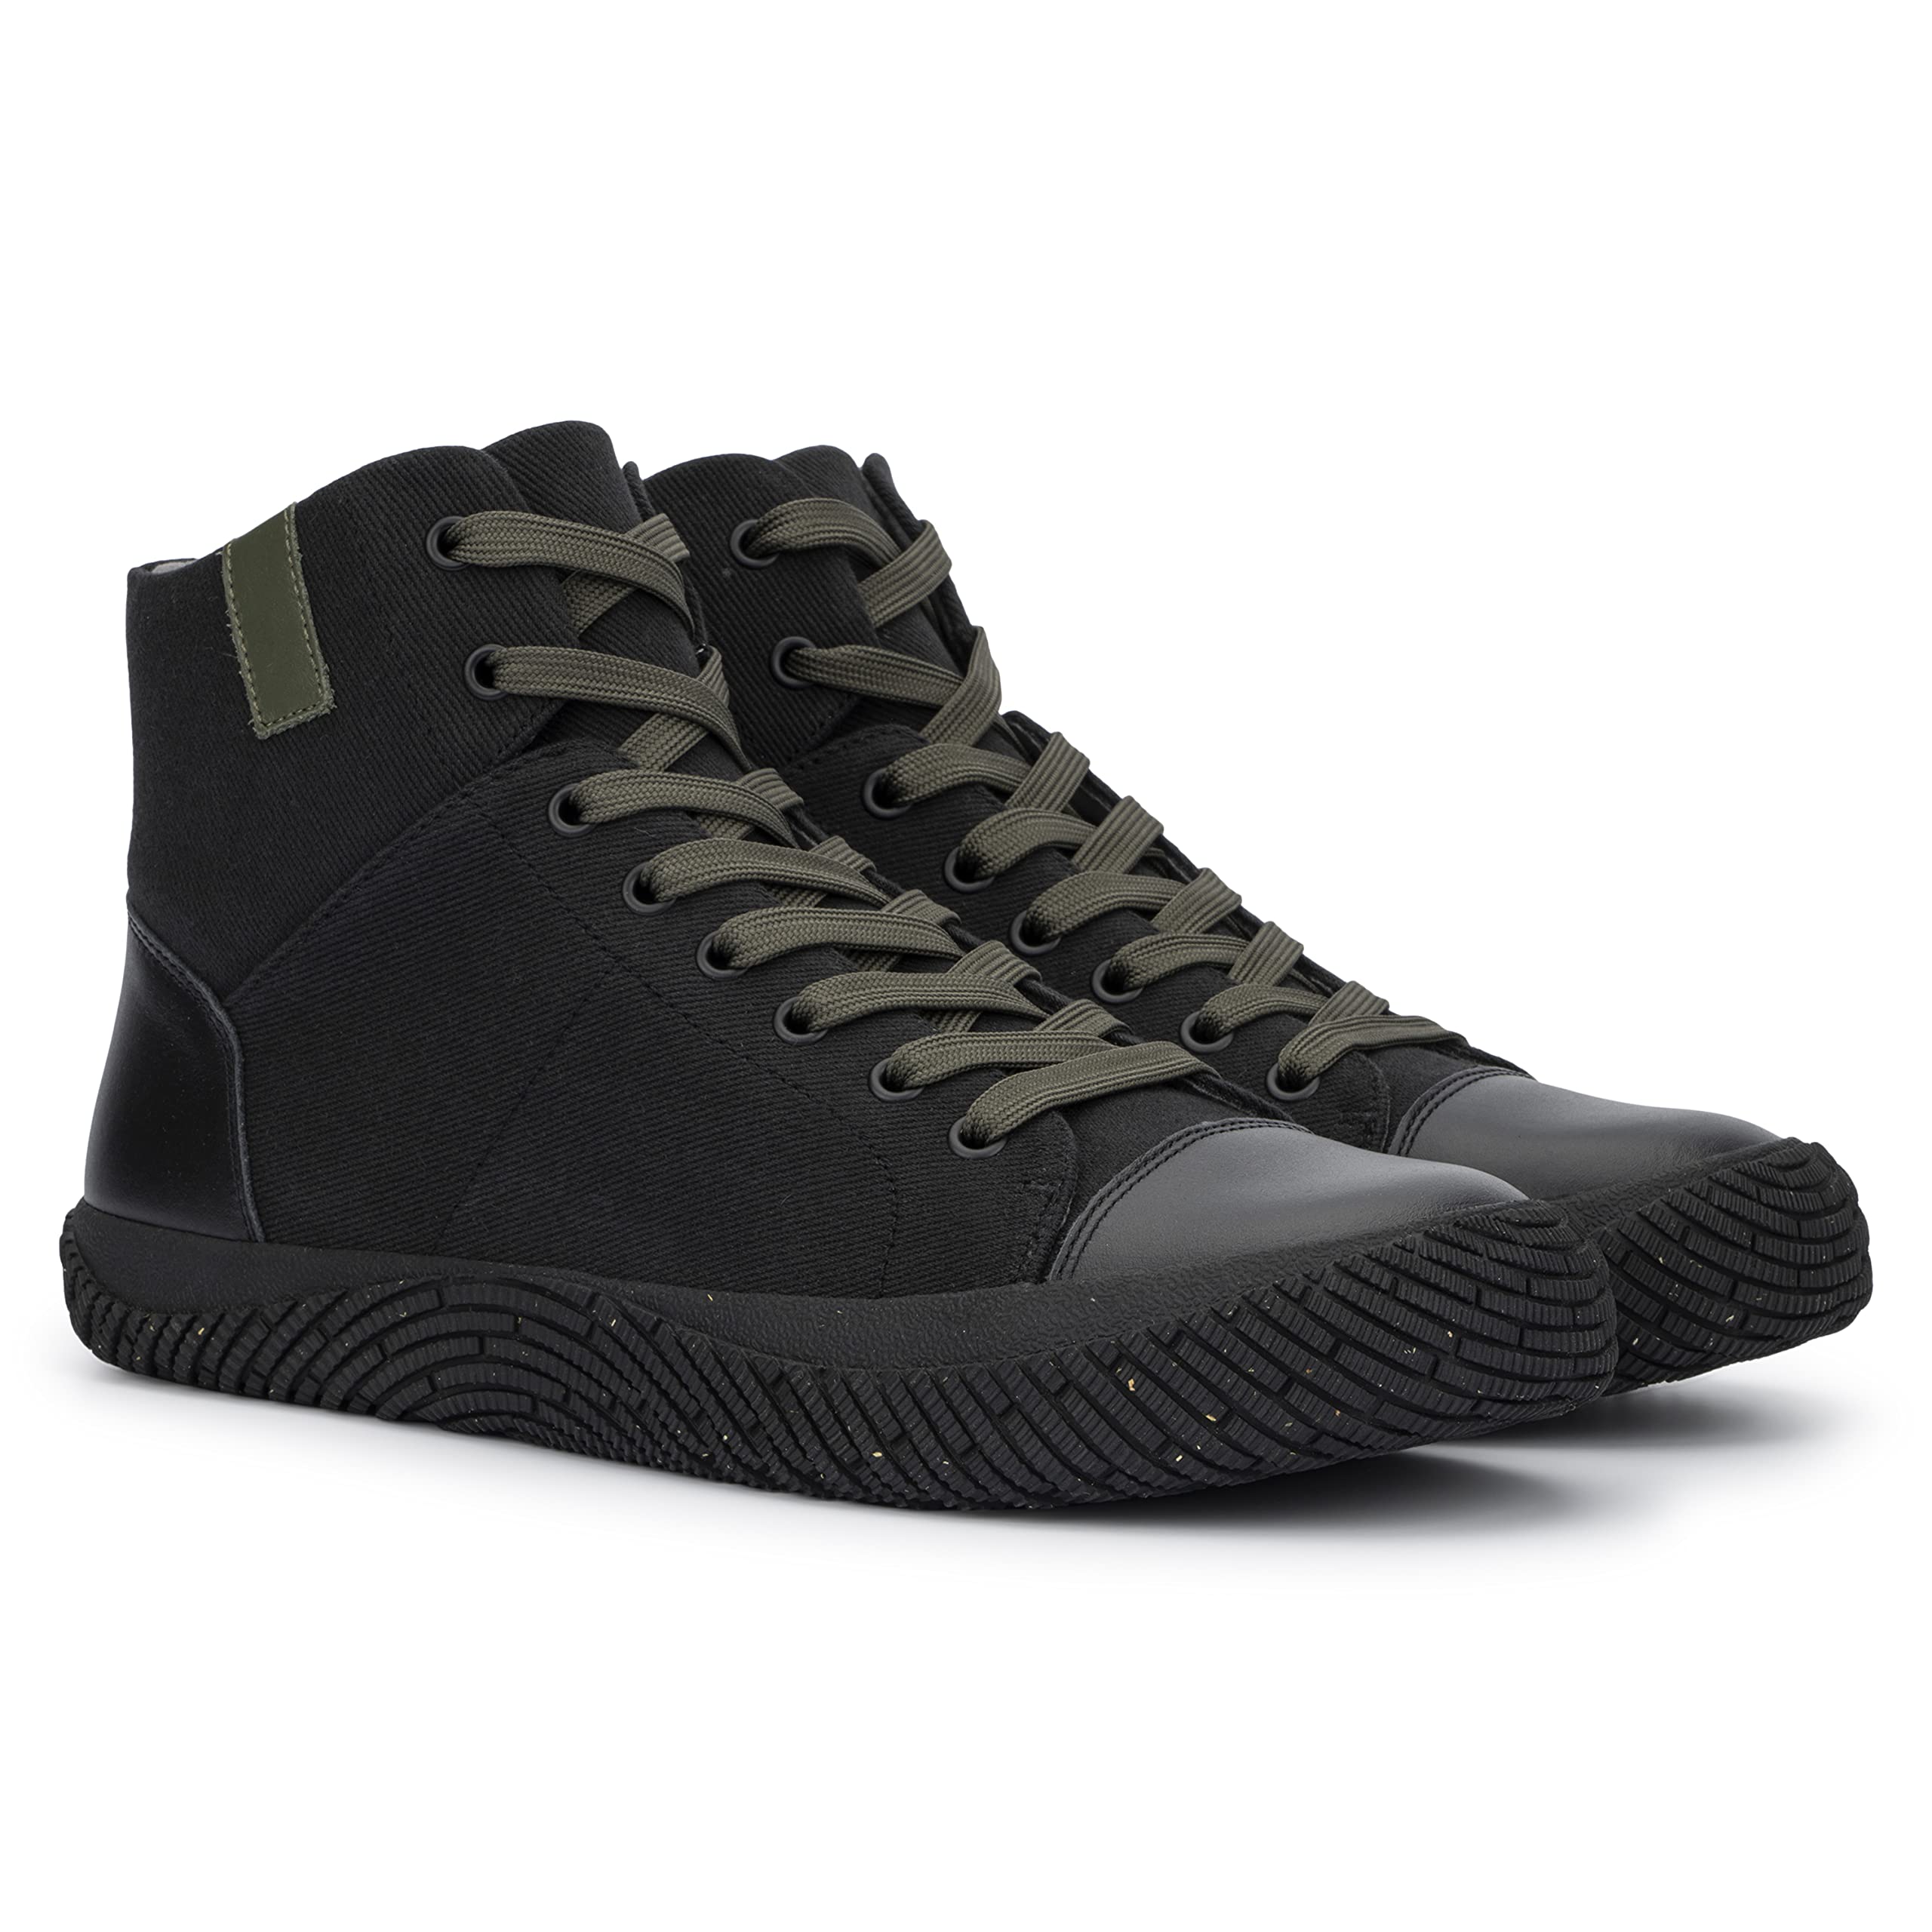 Hybrid Green Label Men's The Wolsey 2.0 High Top Athletic Casual Tennis Hiking Walking Working Shoes, Round Toe, Rubber Outsole